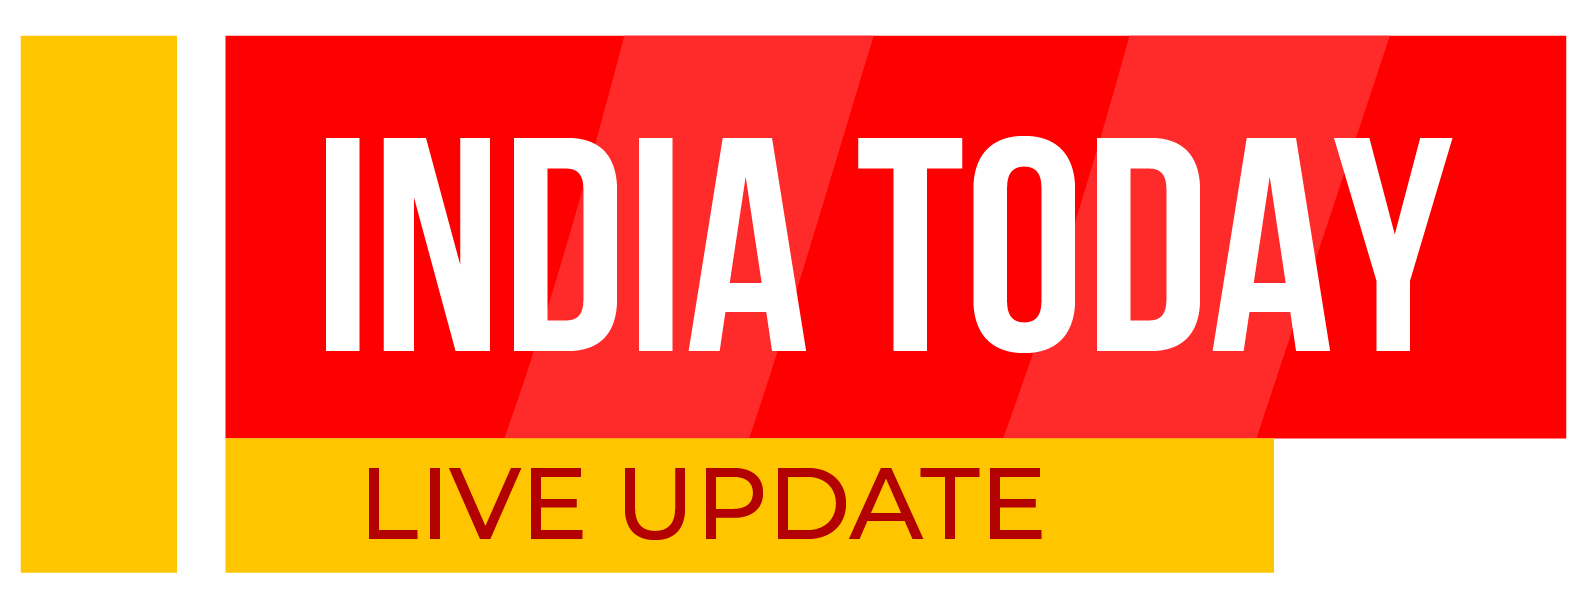 India Today Live Update